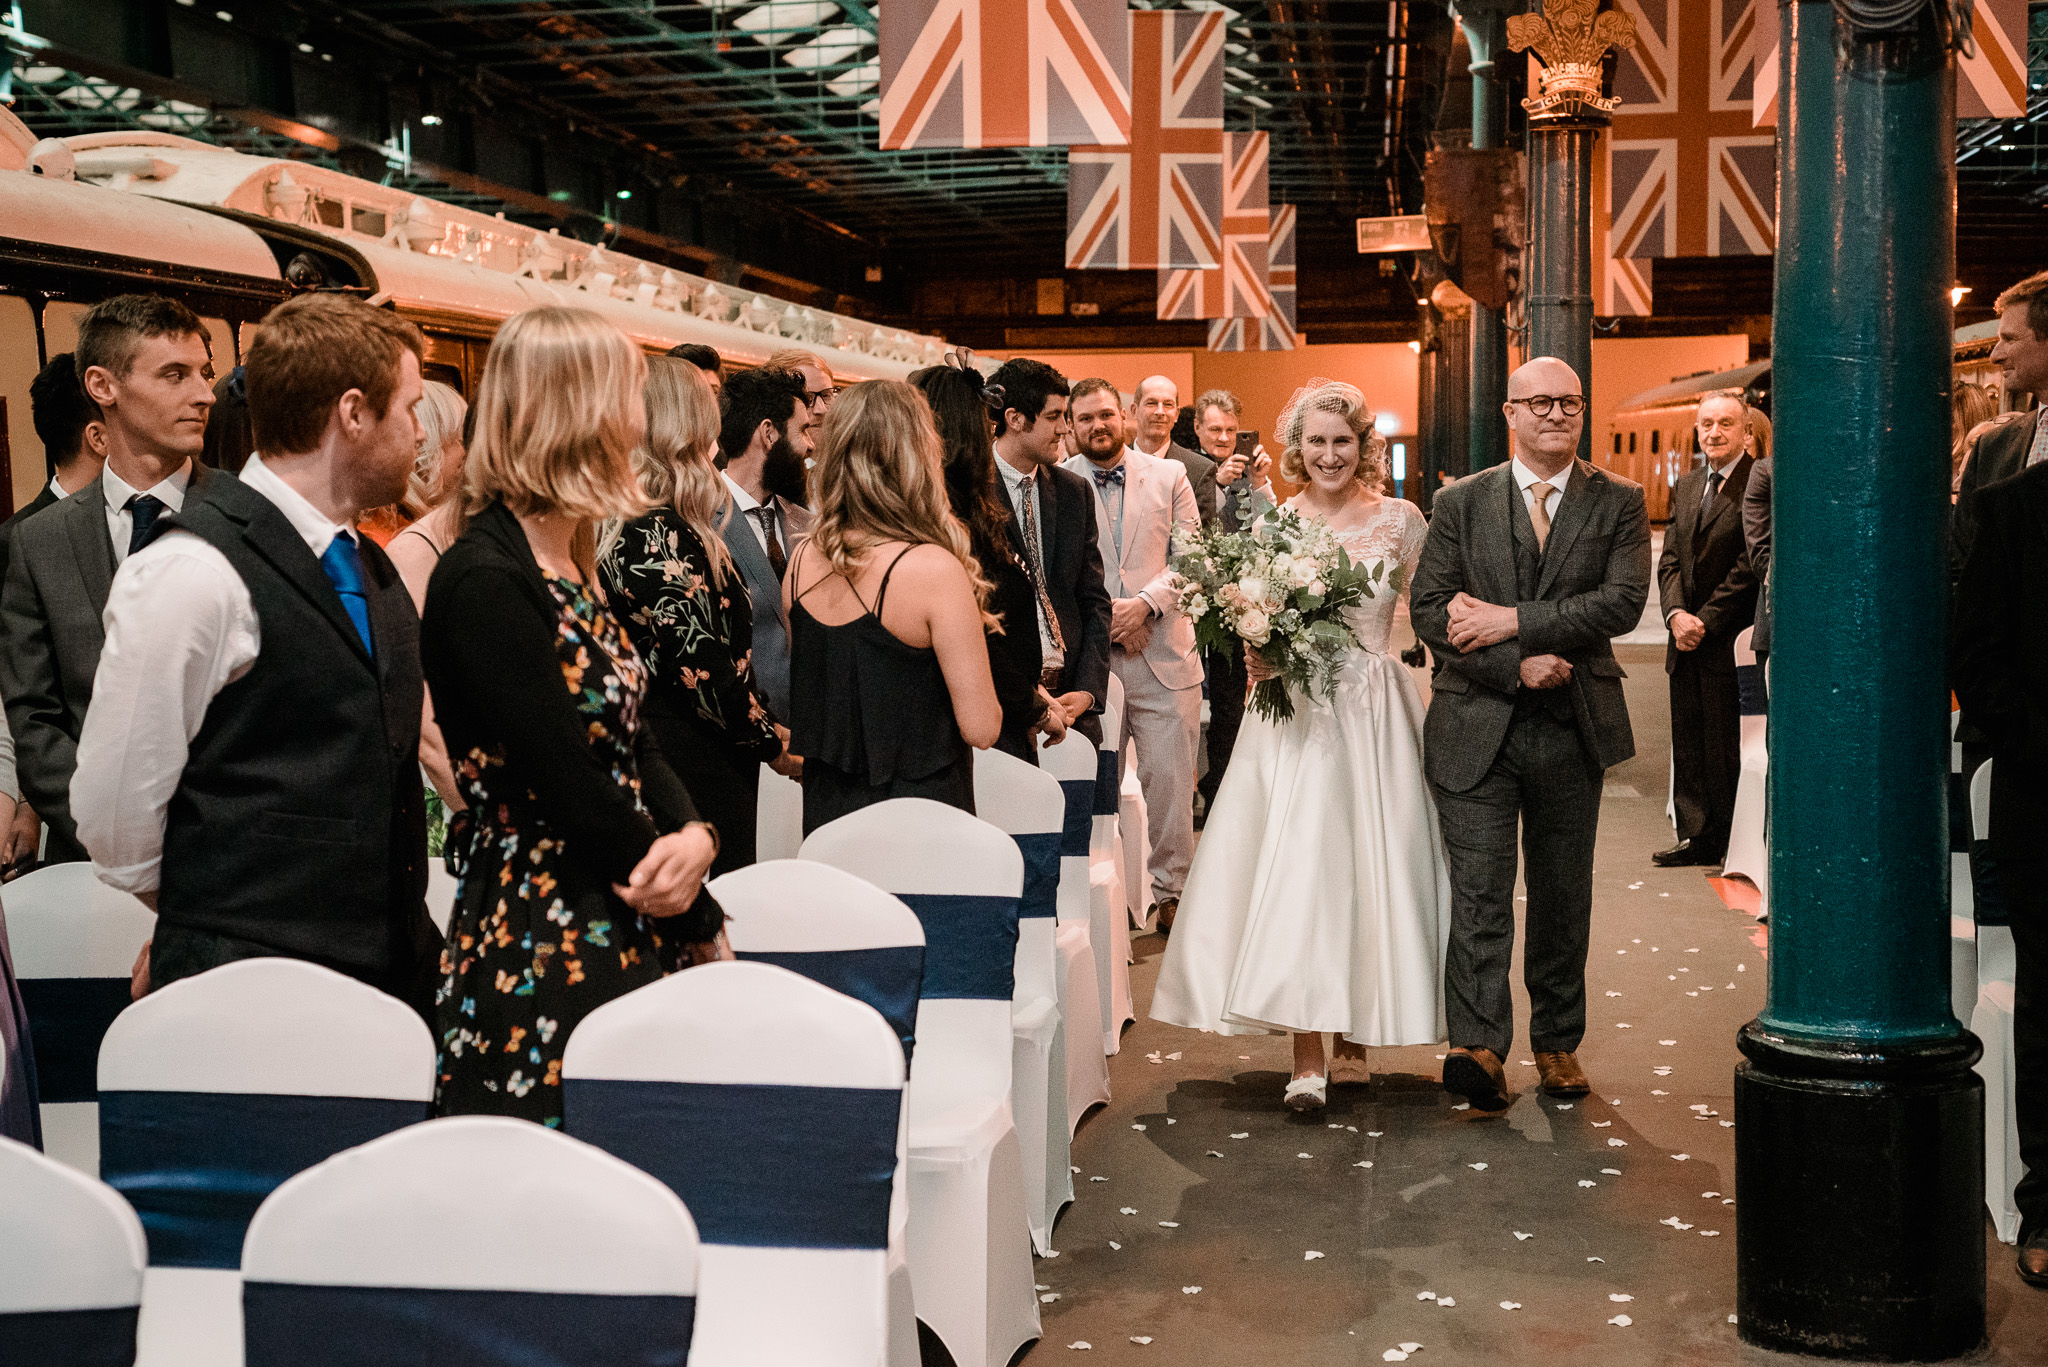 A Railway Museum Wedding with DIY Touches and Vintage Style